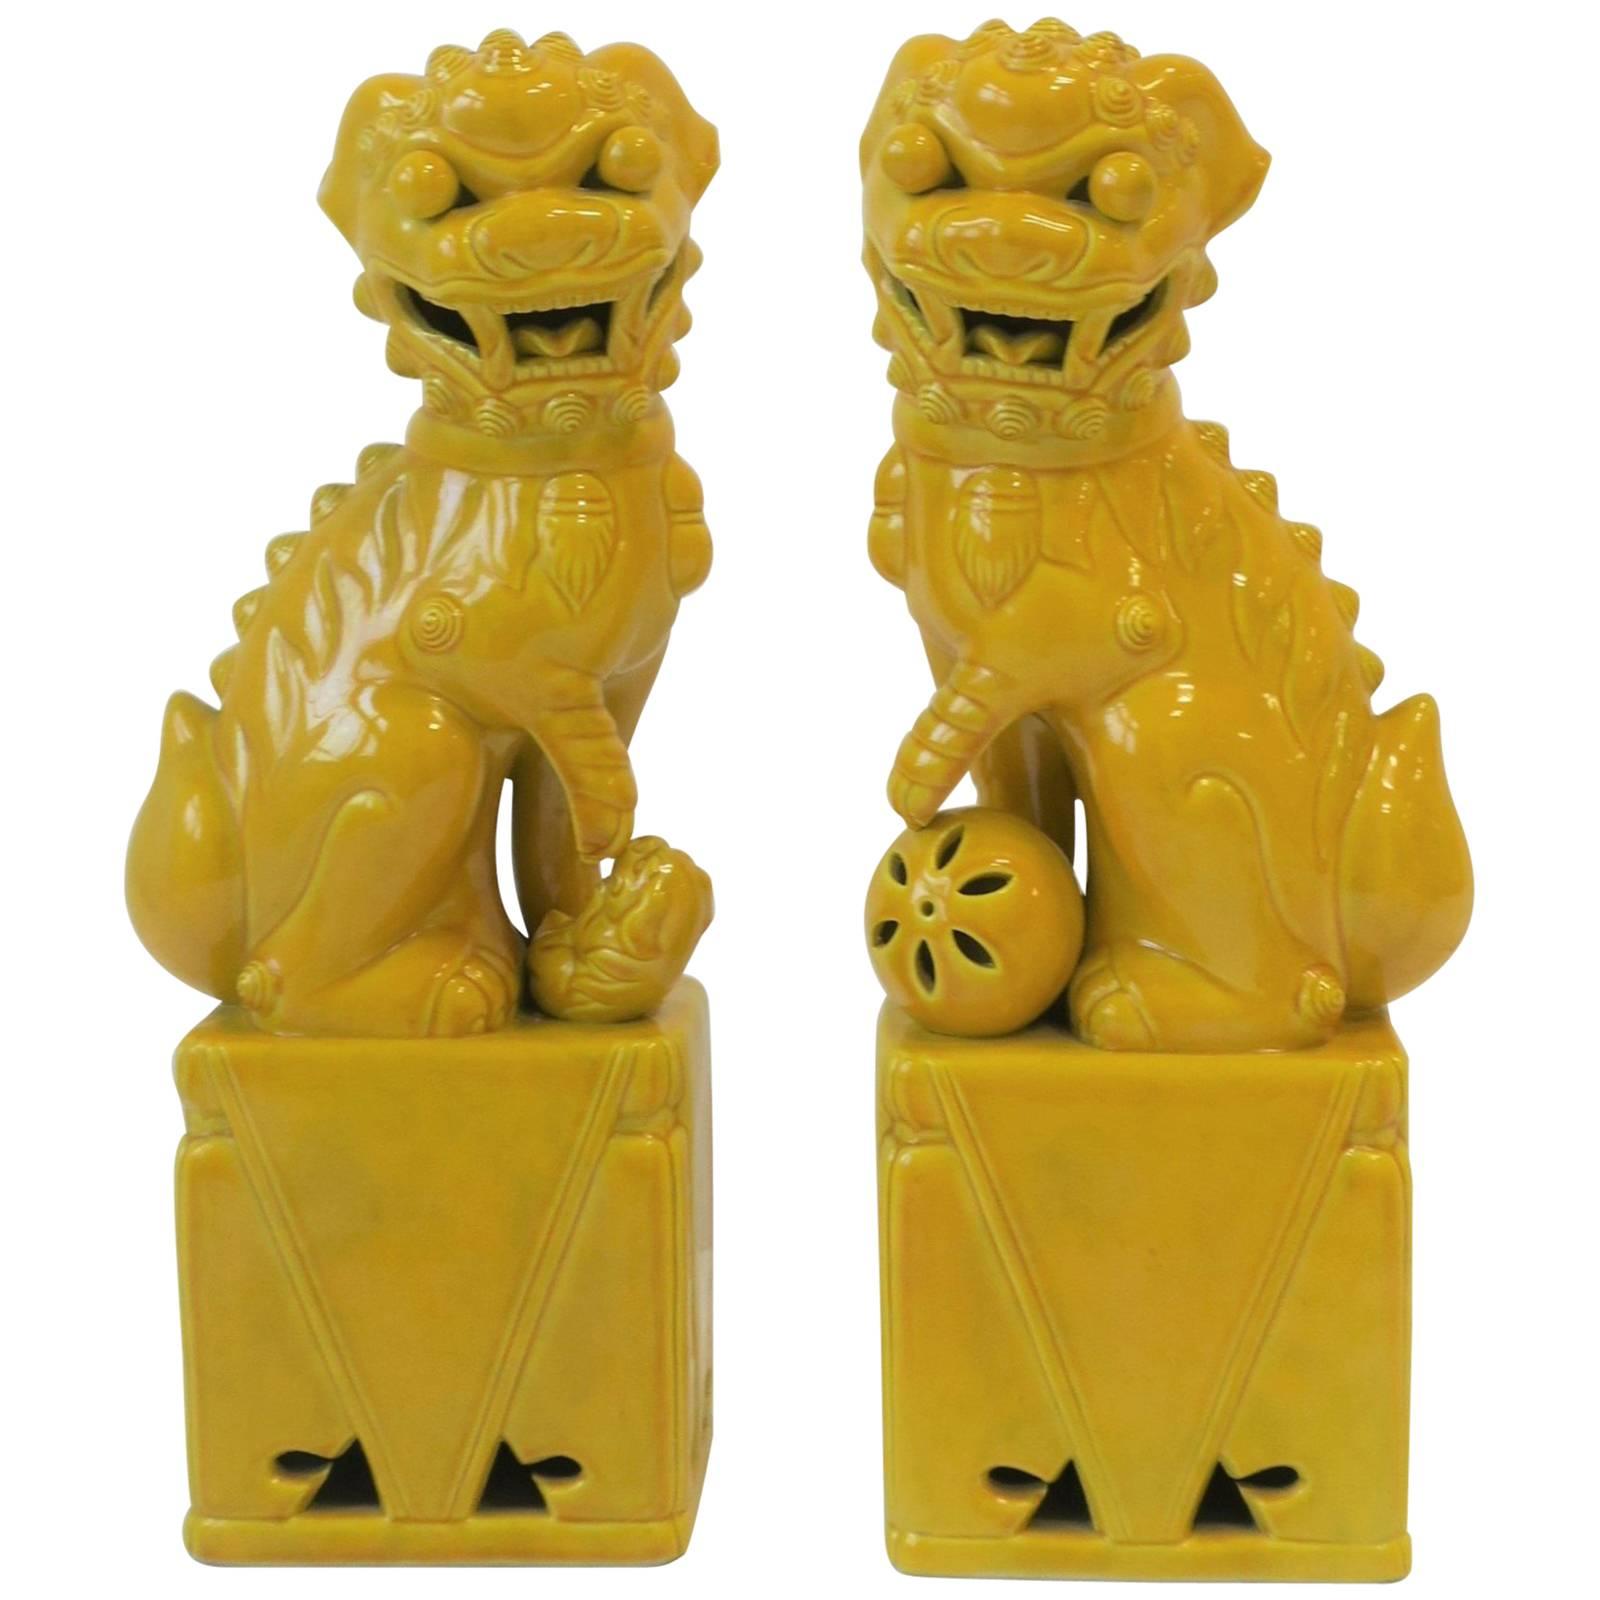 Pair of Tall Midcentury Yellow Foo Dogs or Lion Sculptures 